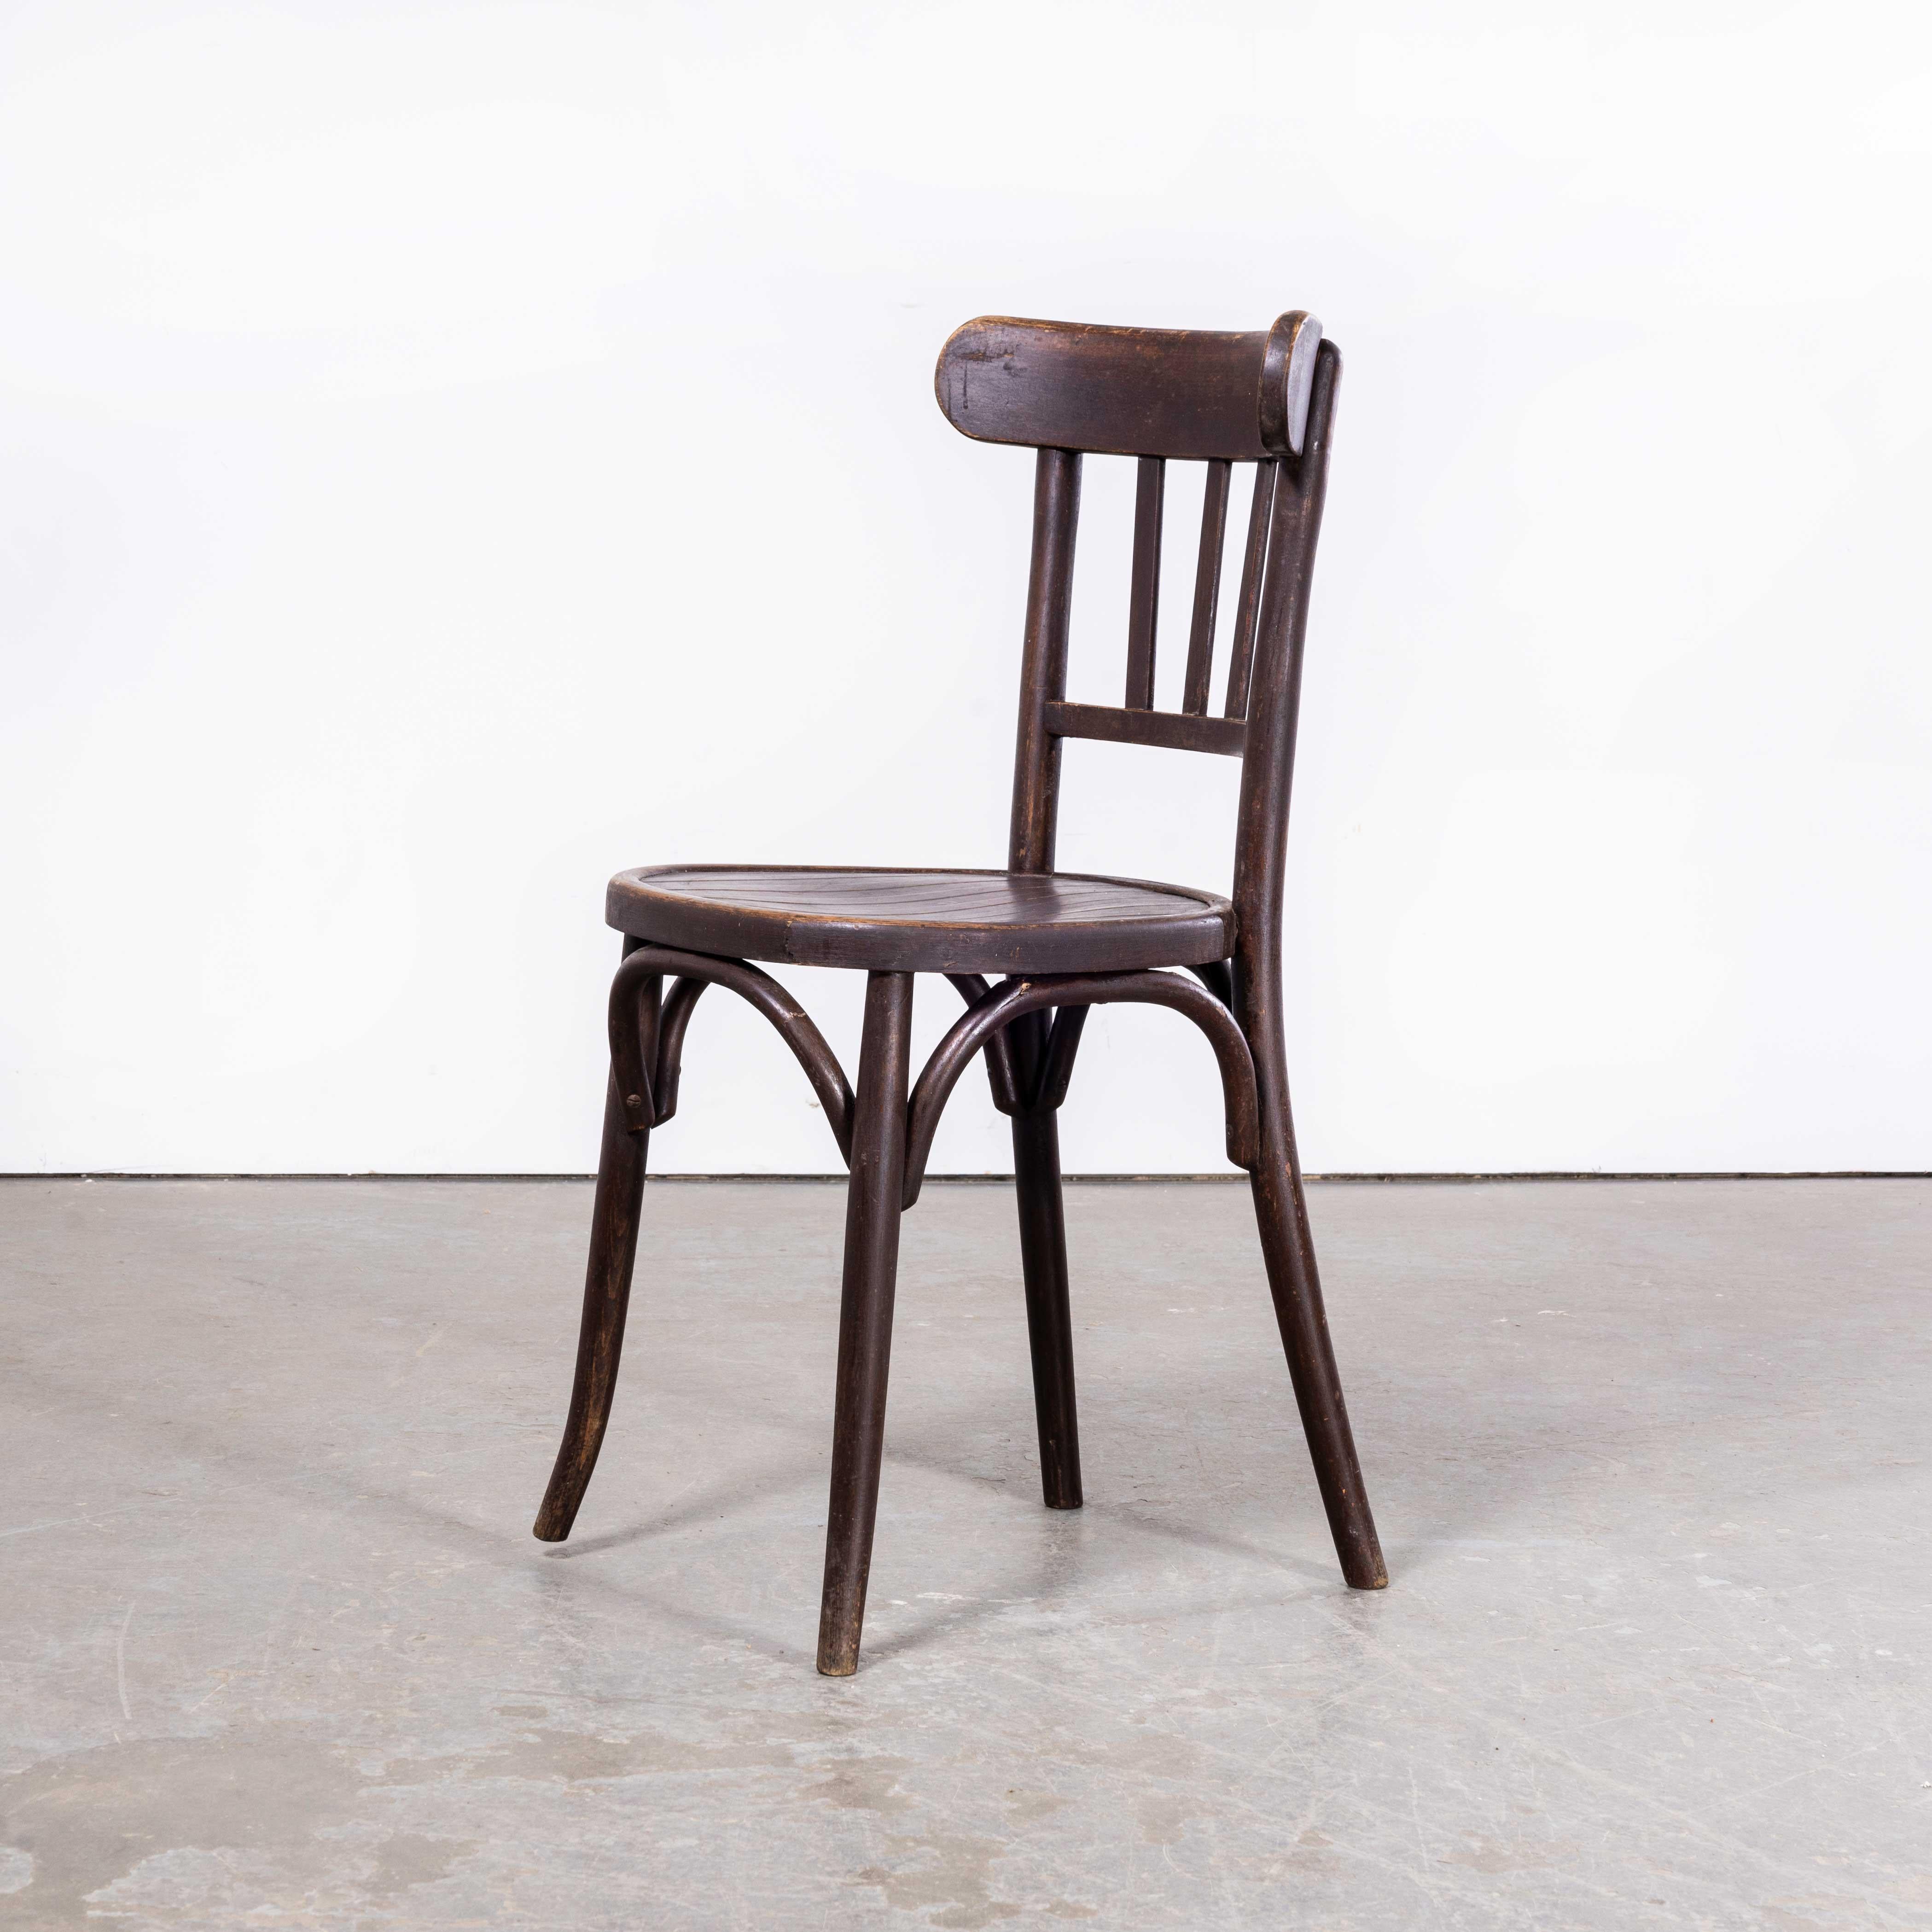 1950’s Dark Walnut Luterma Bentwood Chairs – Set of Five
1950’s Dark Walnut Luterma Bentwood Chairs – Set of Five. The process of steam bending beech to create elegant chairs was discovered and developed by Thonet, but when its patents expired in